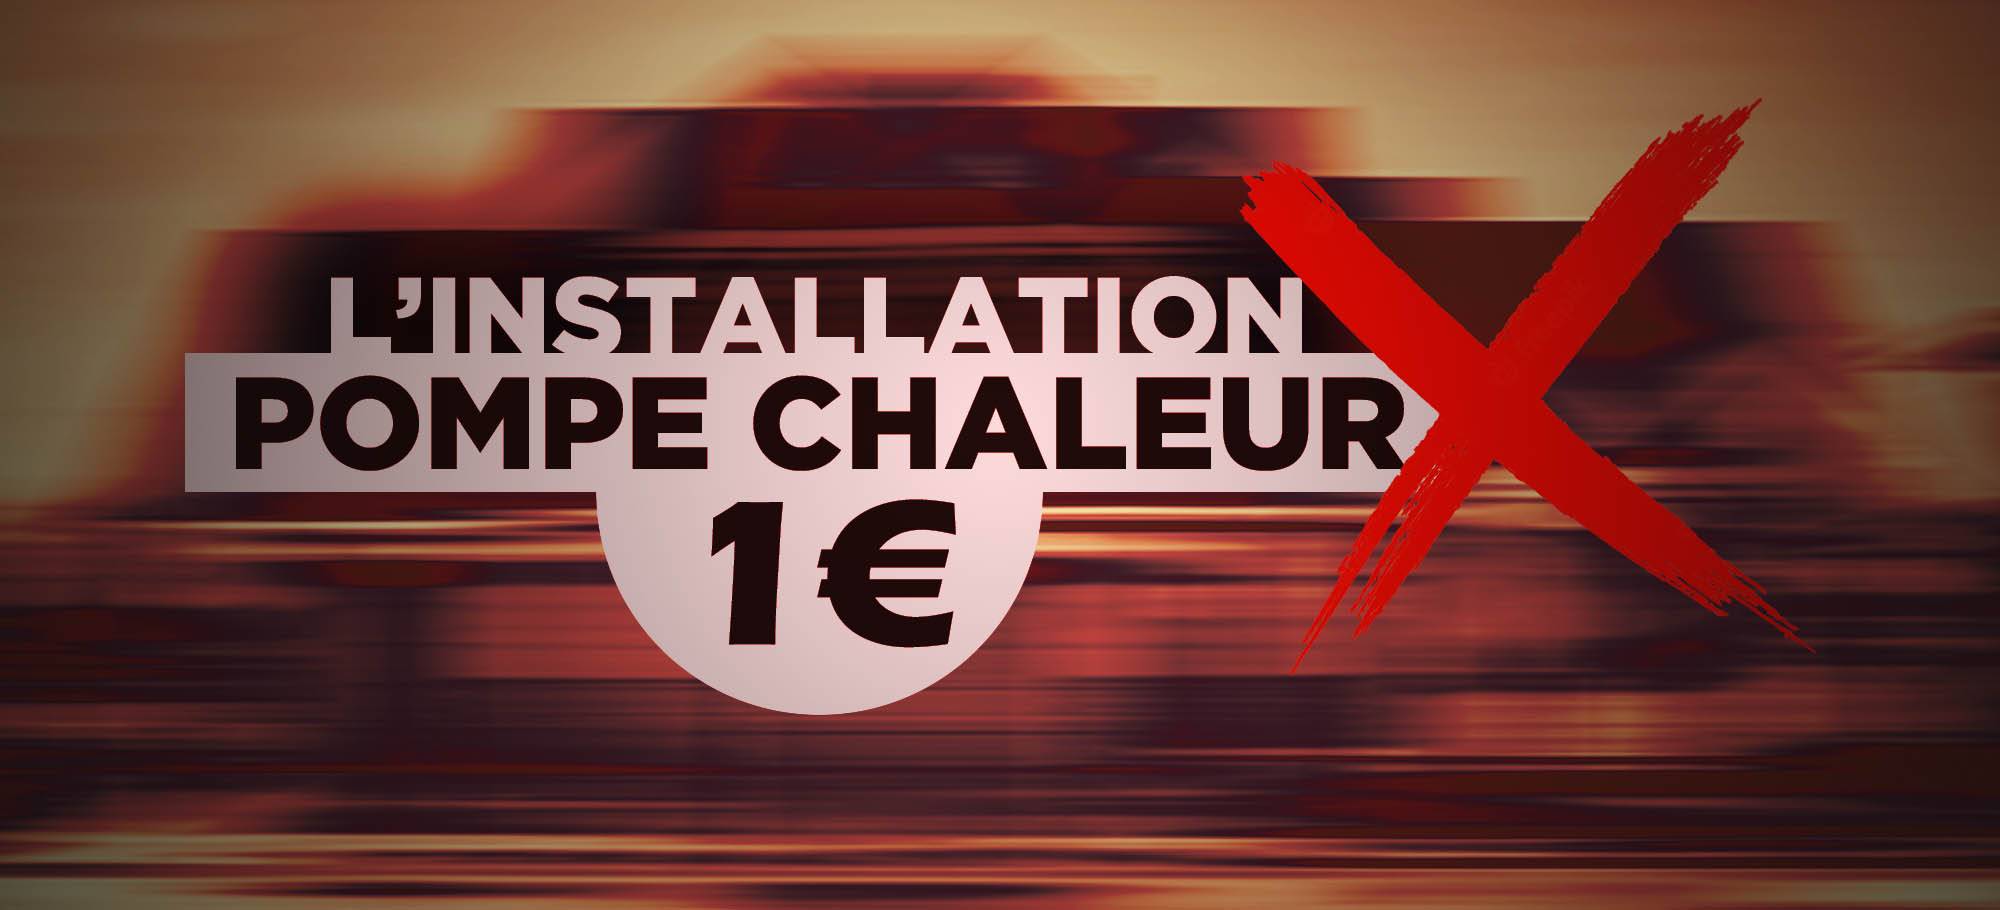 You are currently viewing L’installation d’une pompe chaleur à 1 euro